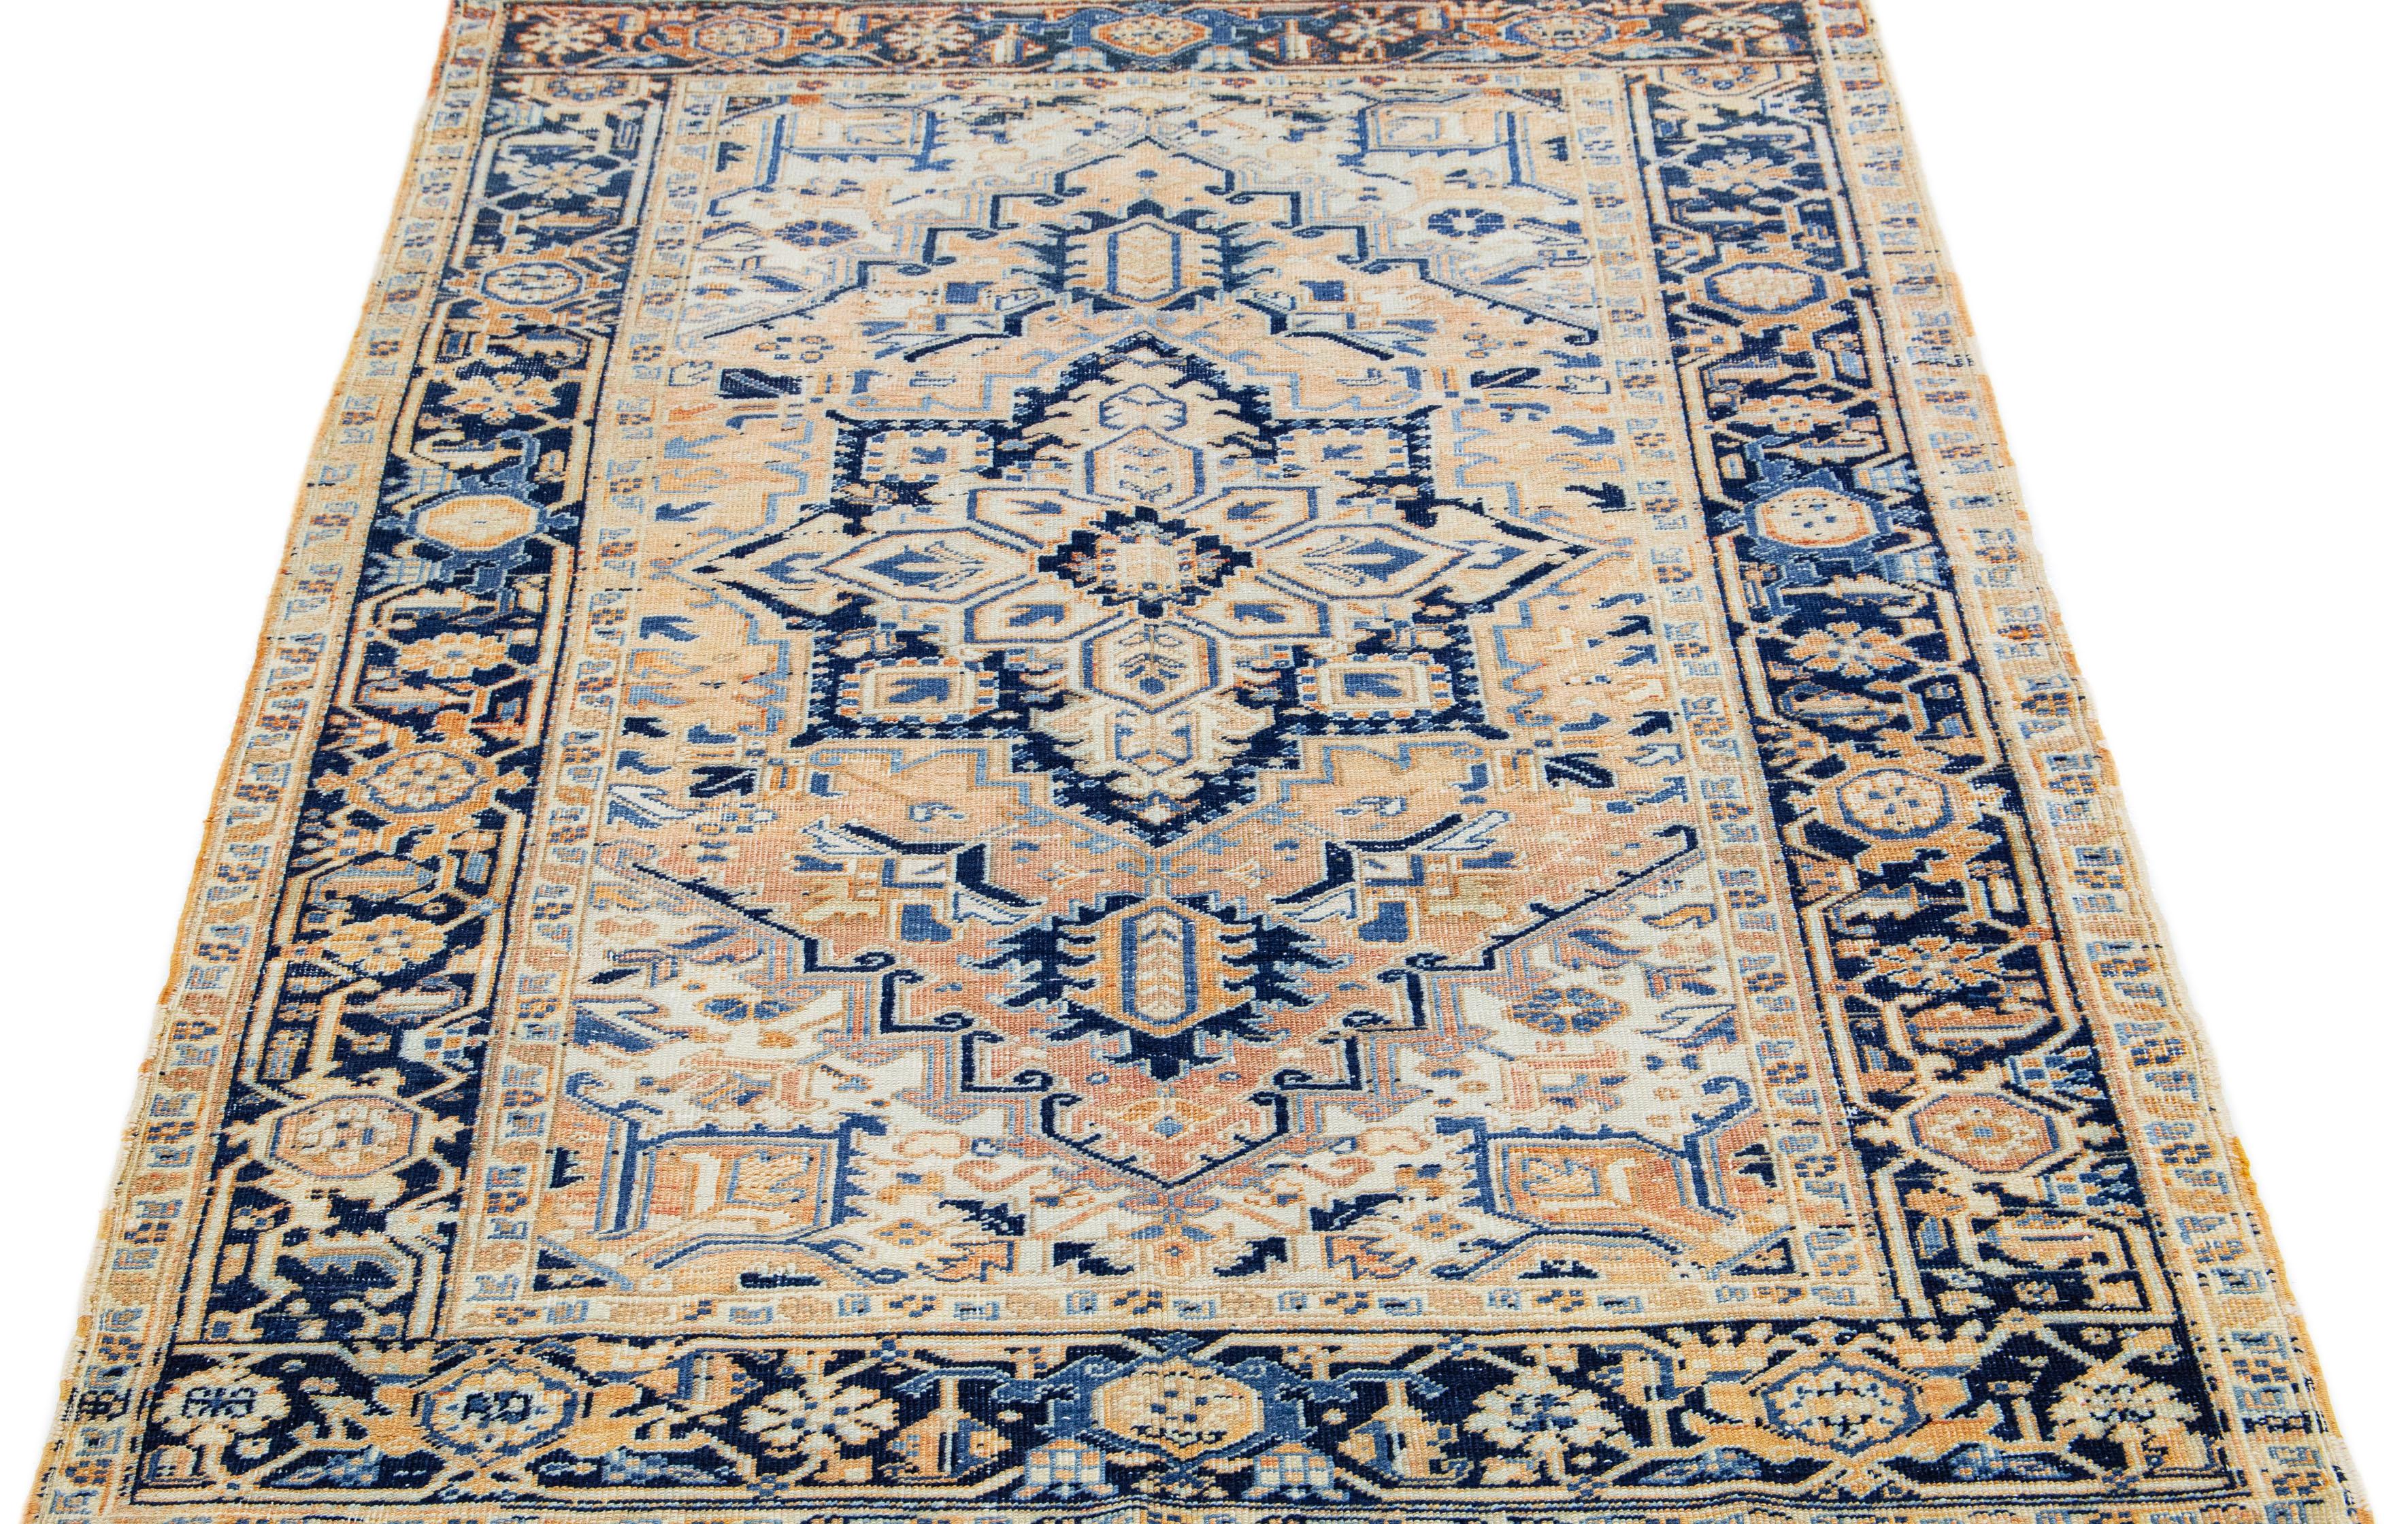 The antique Heriz rug's premium hand-knotted wool and striking medallion design exude timeless elegance and sophistication. The intricate geometric floral pattern in shades of blue and orange adds a touch of allure to the soft peach field, making it